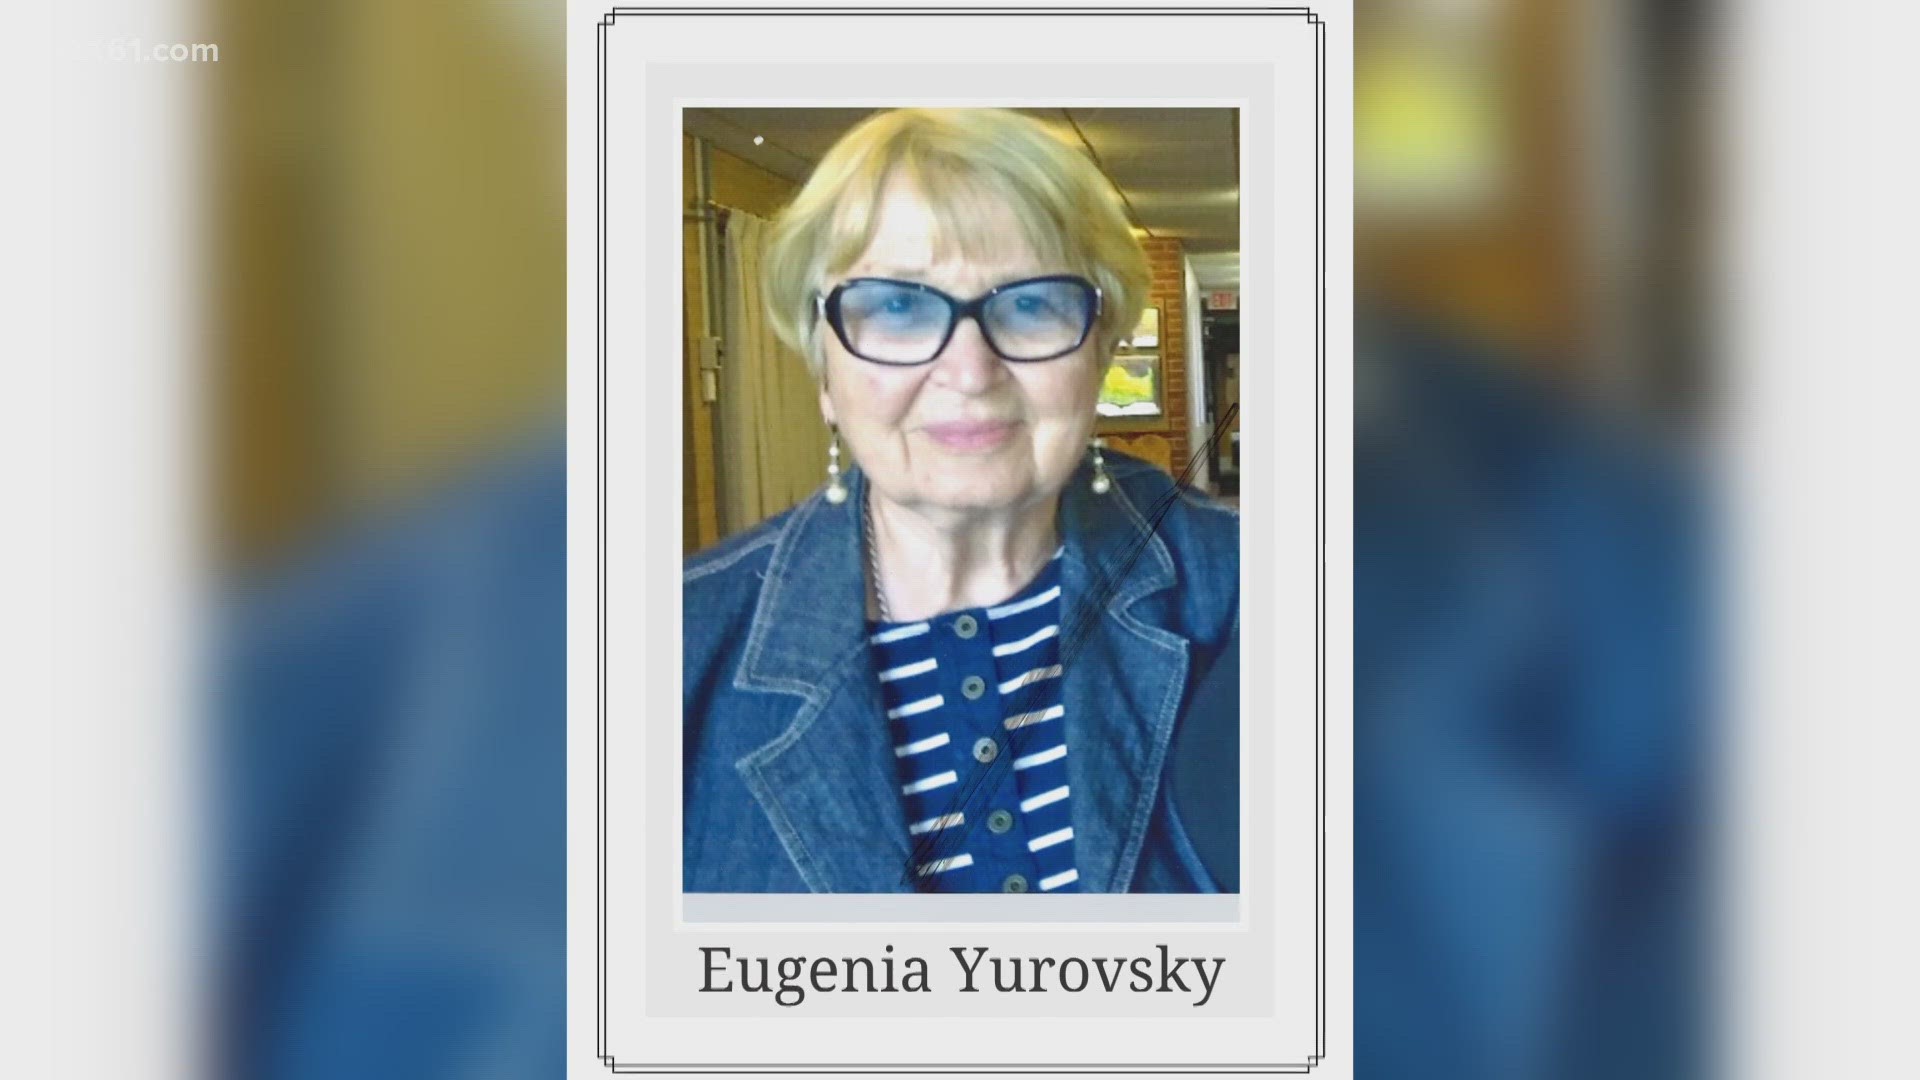 Police said on December 20, 2022, Eugenia Yurovsky was hit while crossing the street with her walker, at the intersection of Boulevard and Whiting Lane.